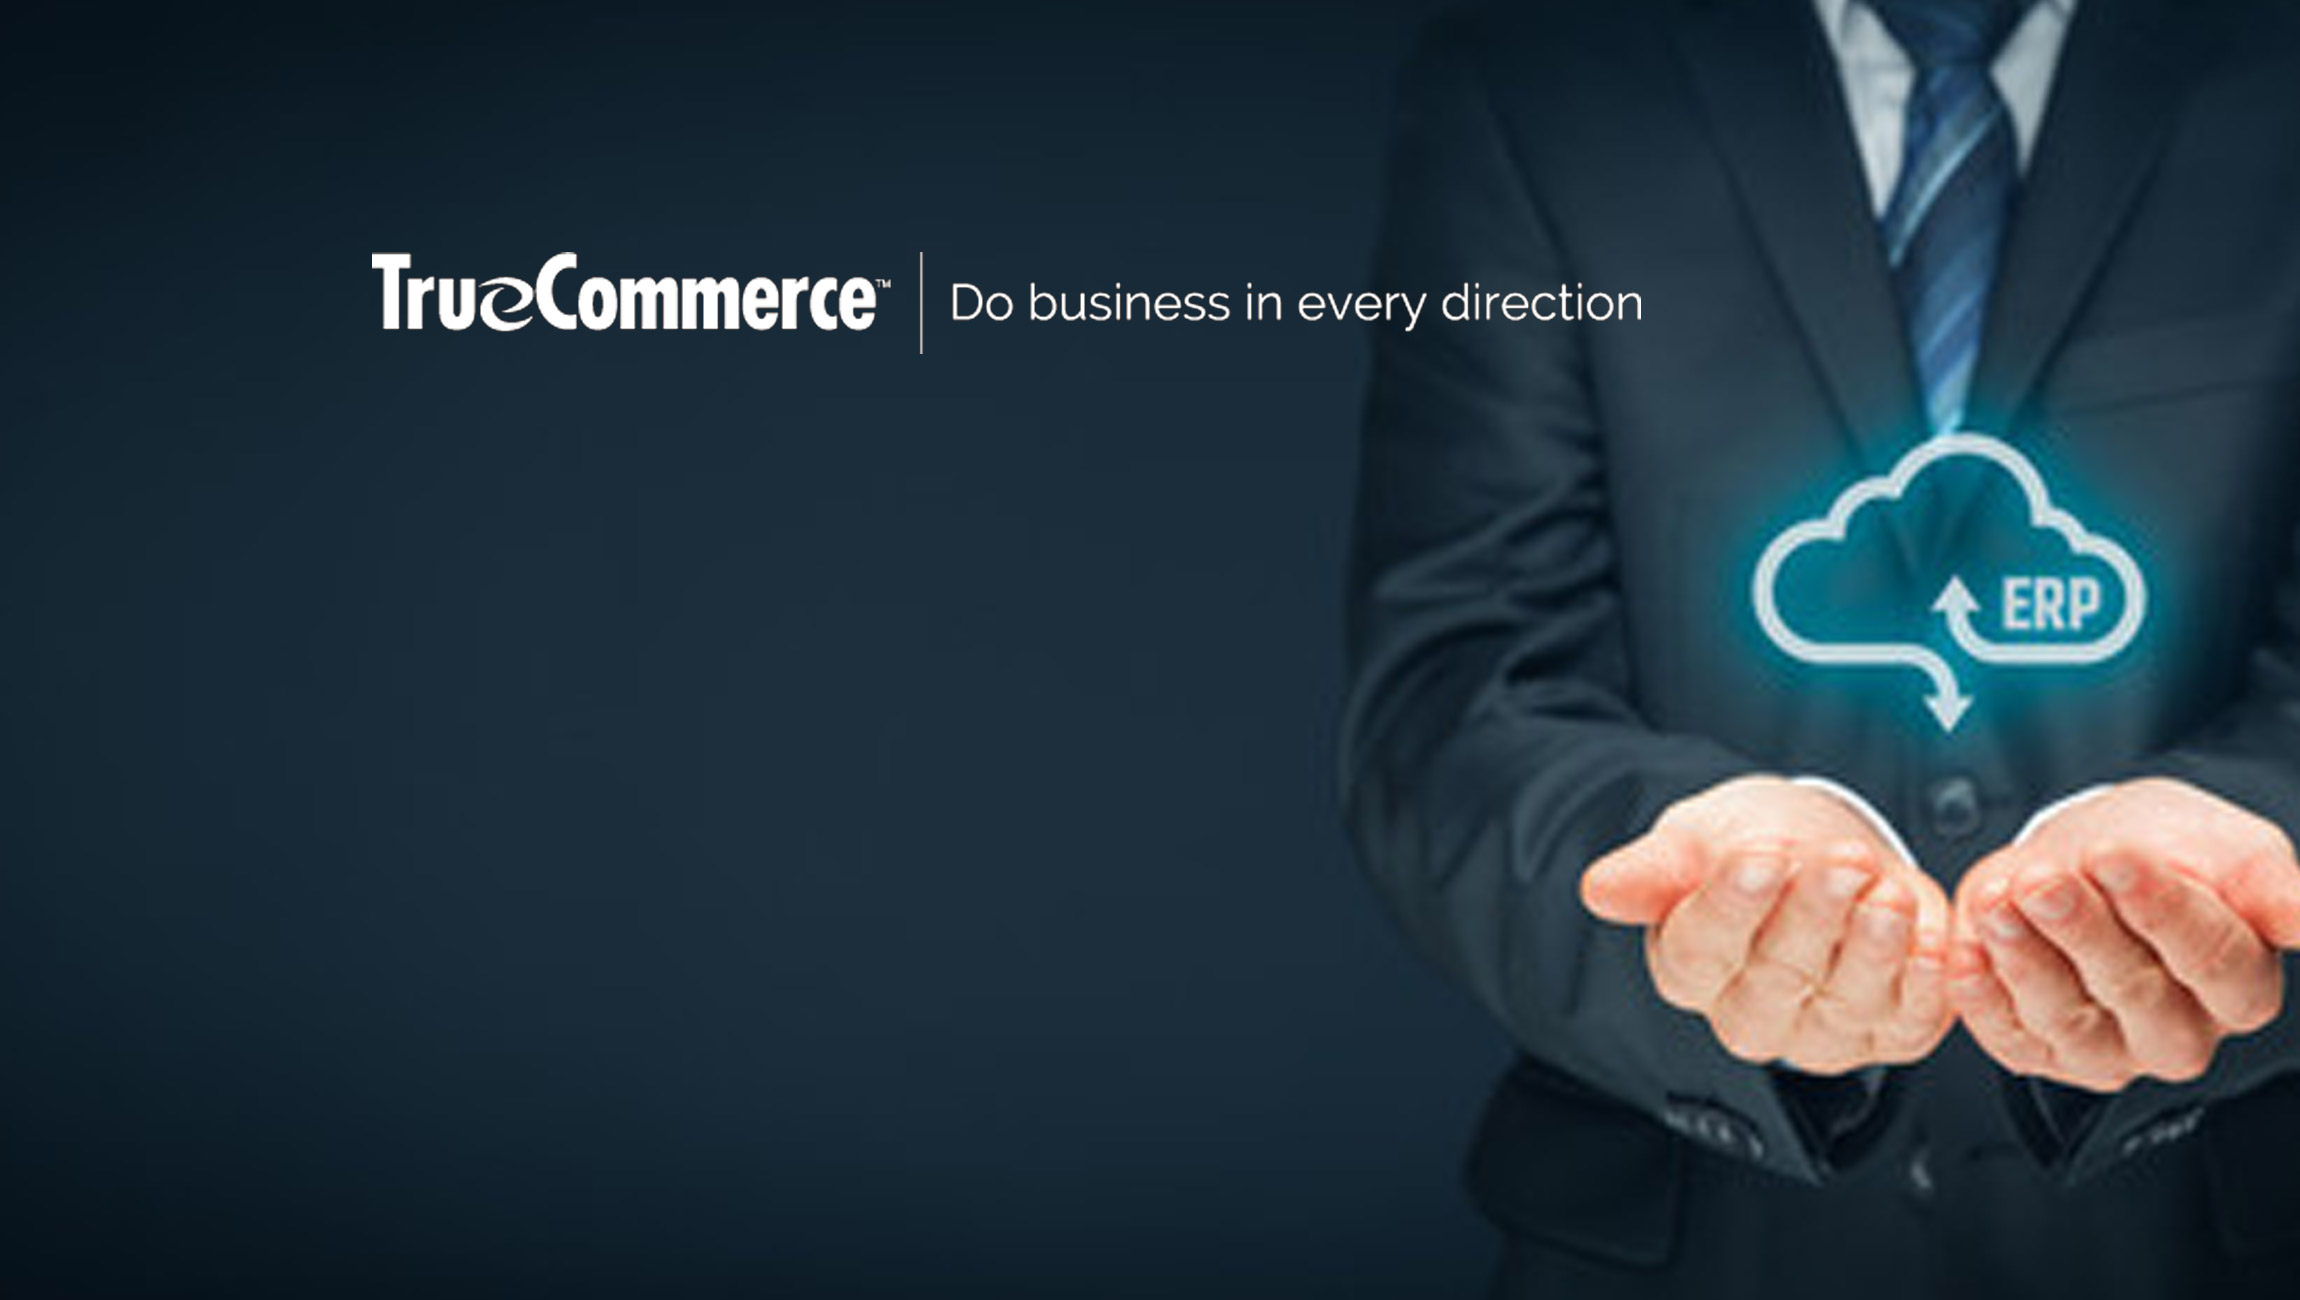 TrueCommerce-Speaks-on-Supply-Chain-Connectivity-at-Cloud-ERP-Conferences-Worldwide